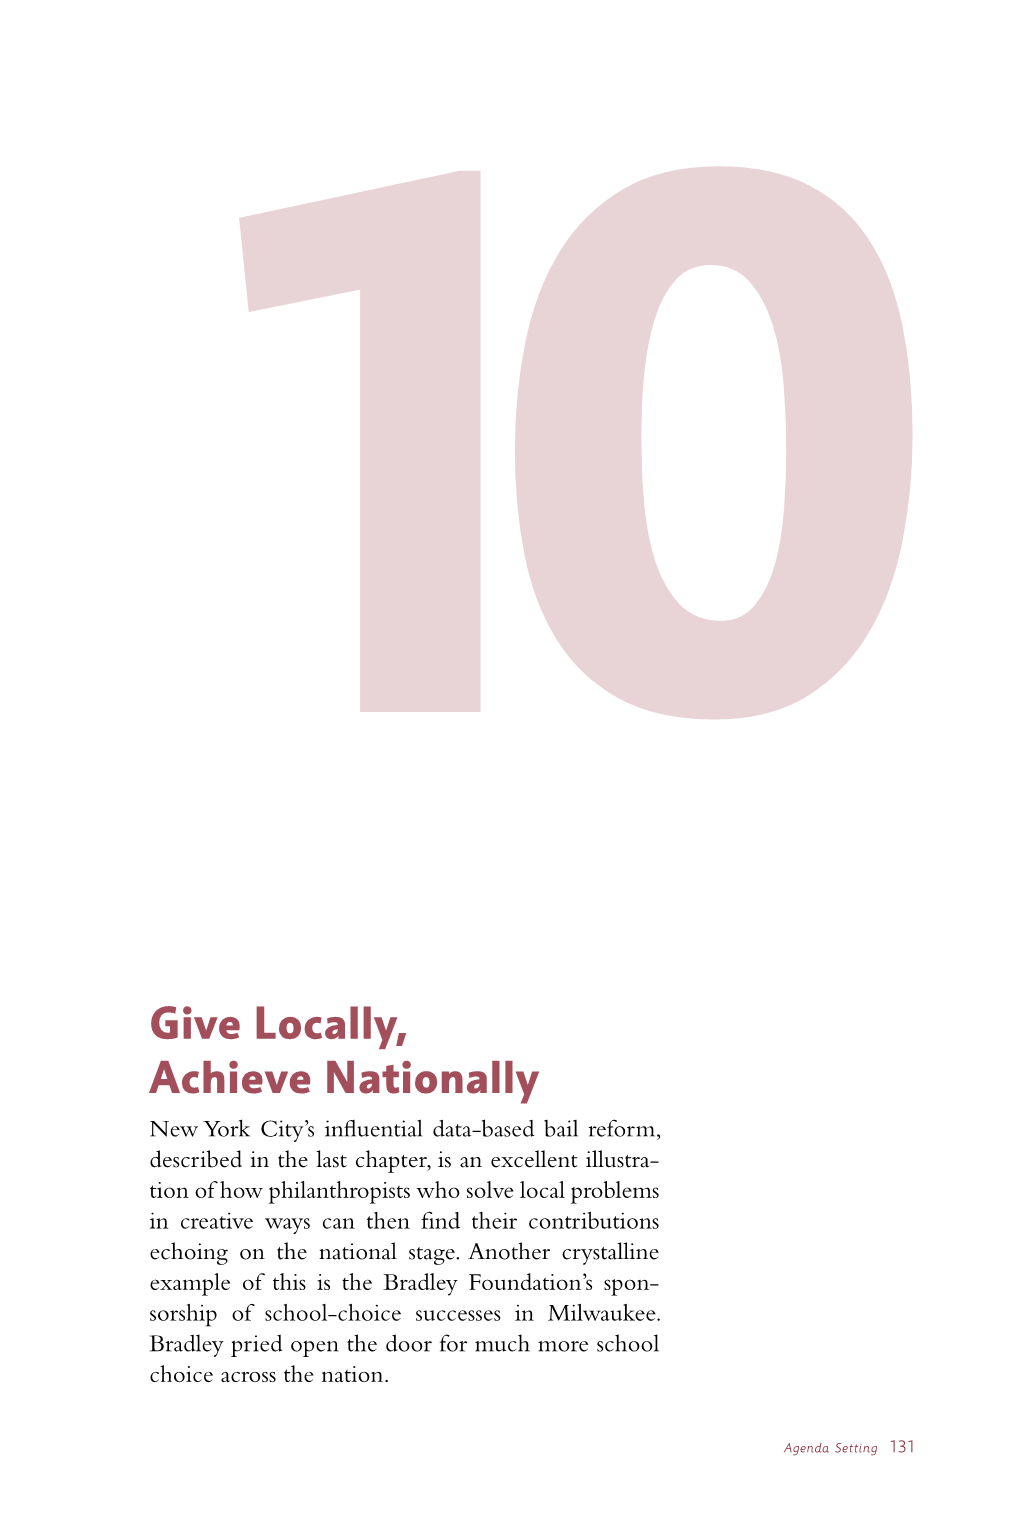 Give Locally, Achieve Nationally